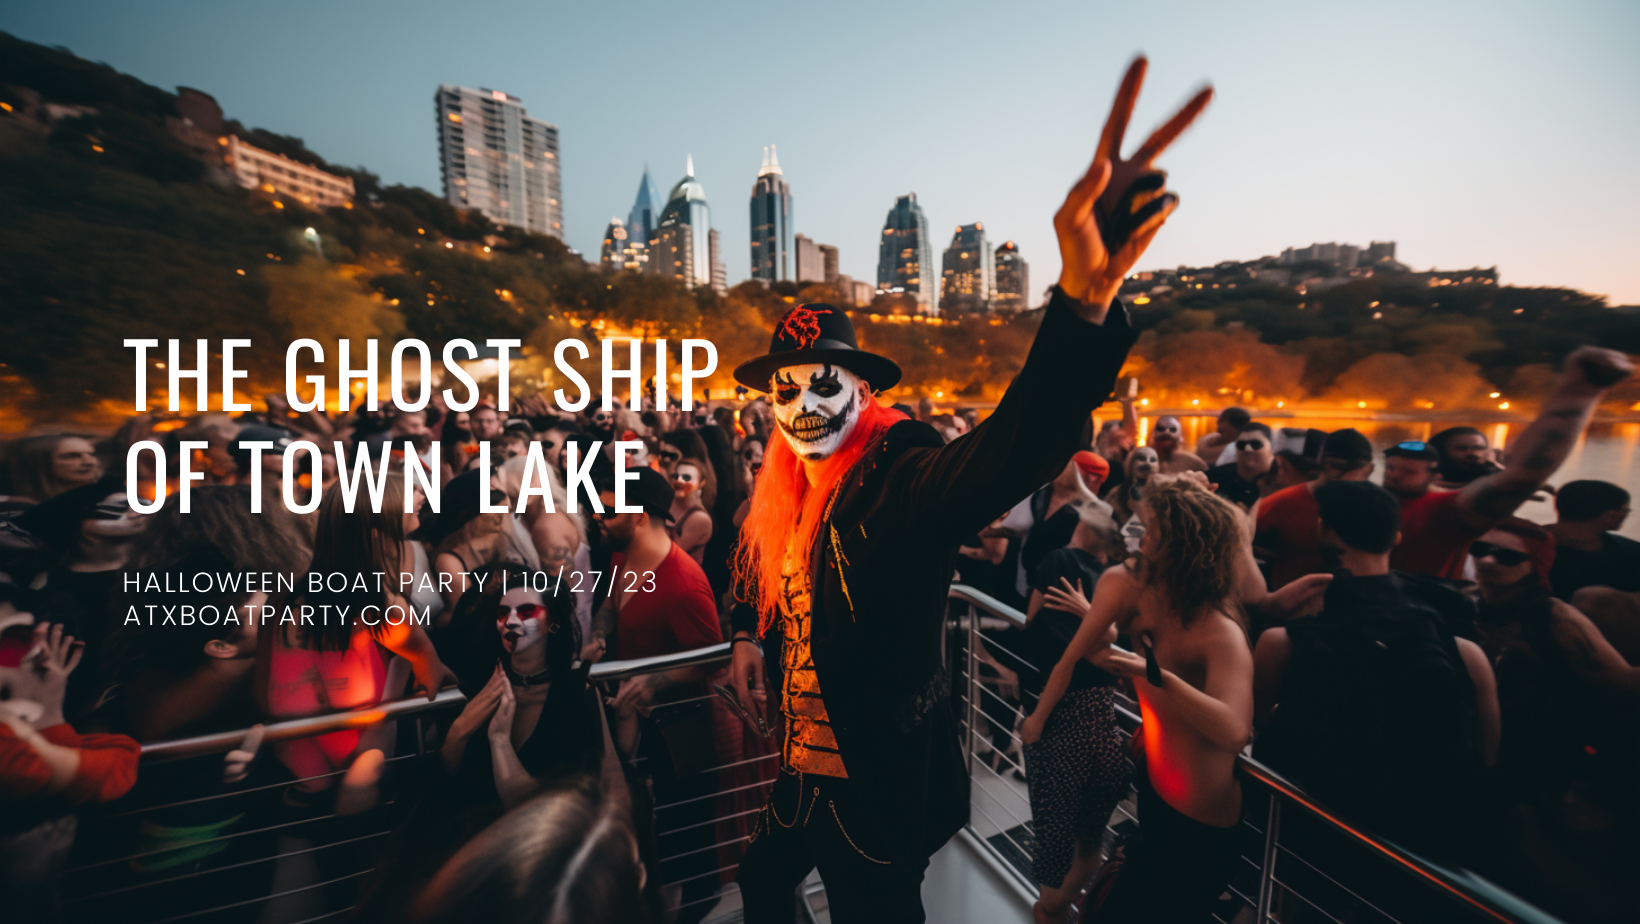 The Ghost Ship of Town Lake - フライヤー表